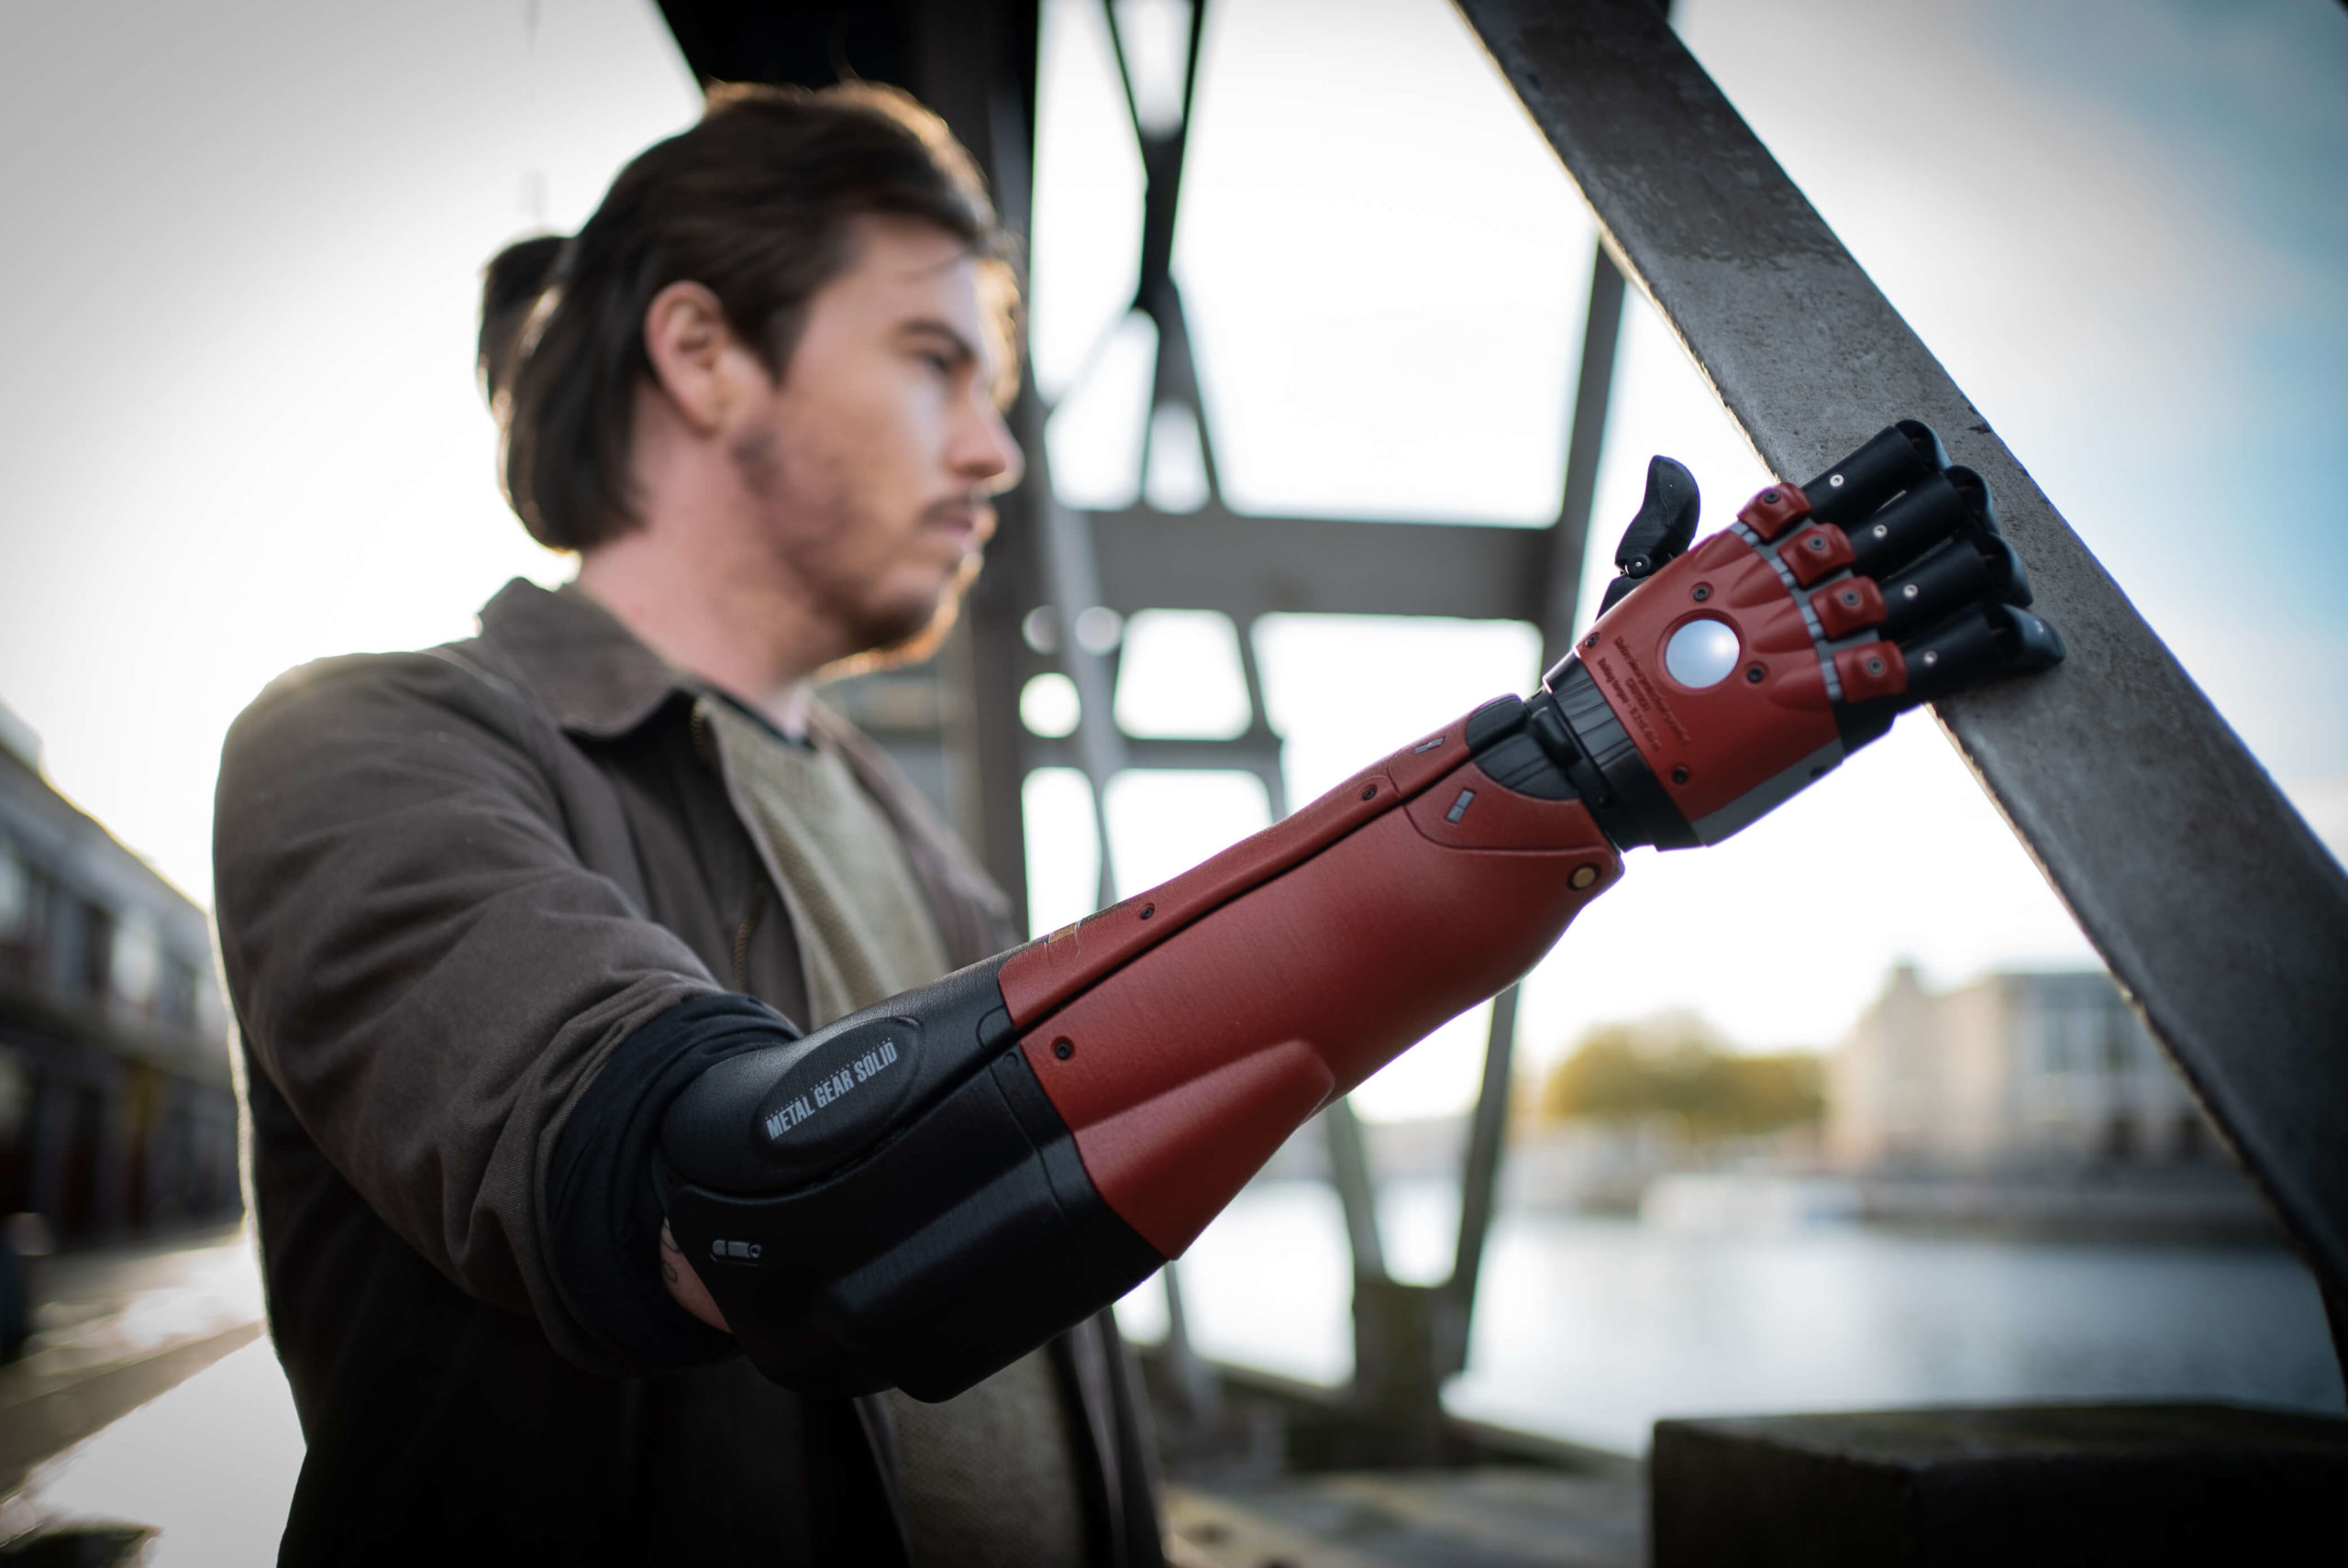 The Hero Arm is a Prosthetic Arm Made by Open Bionics